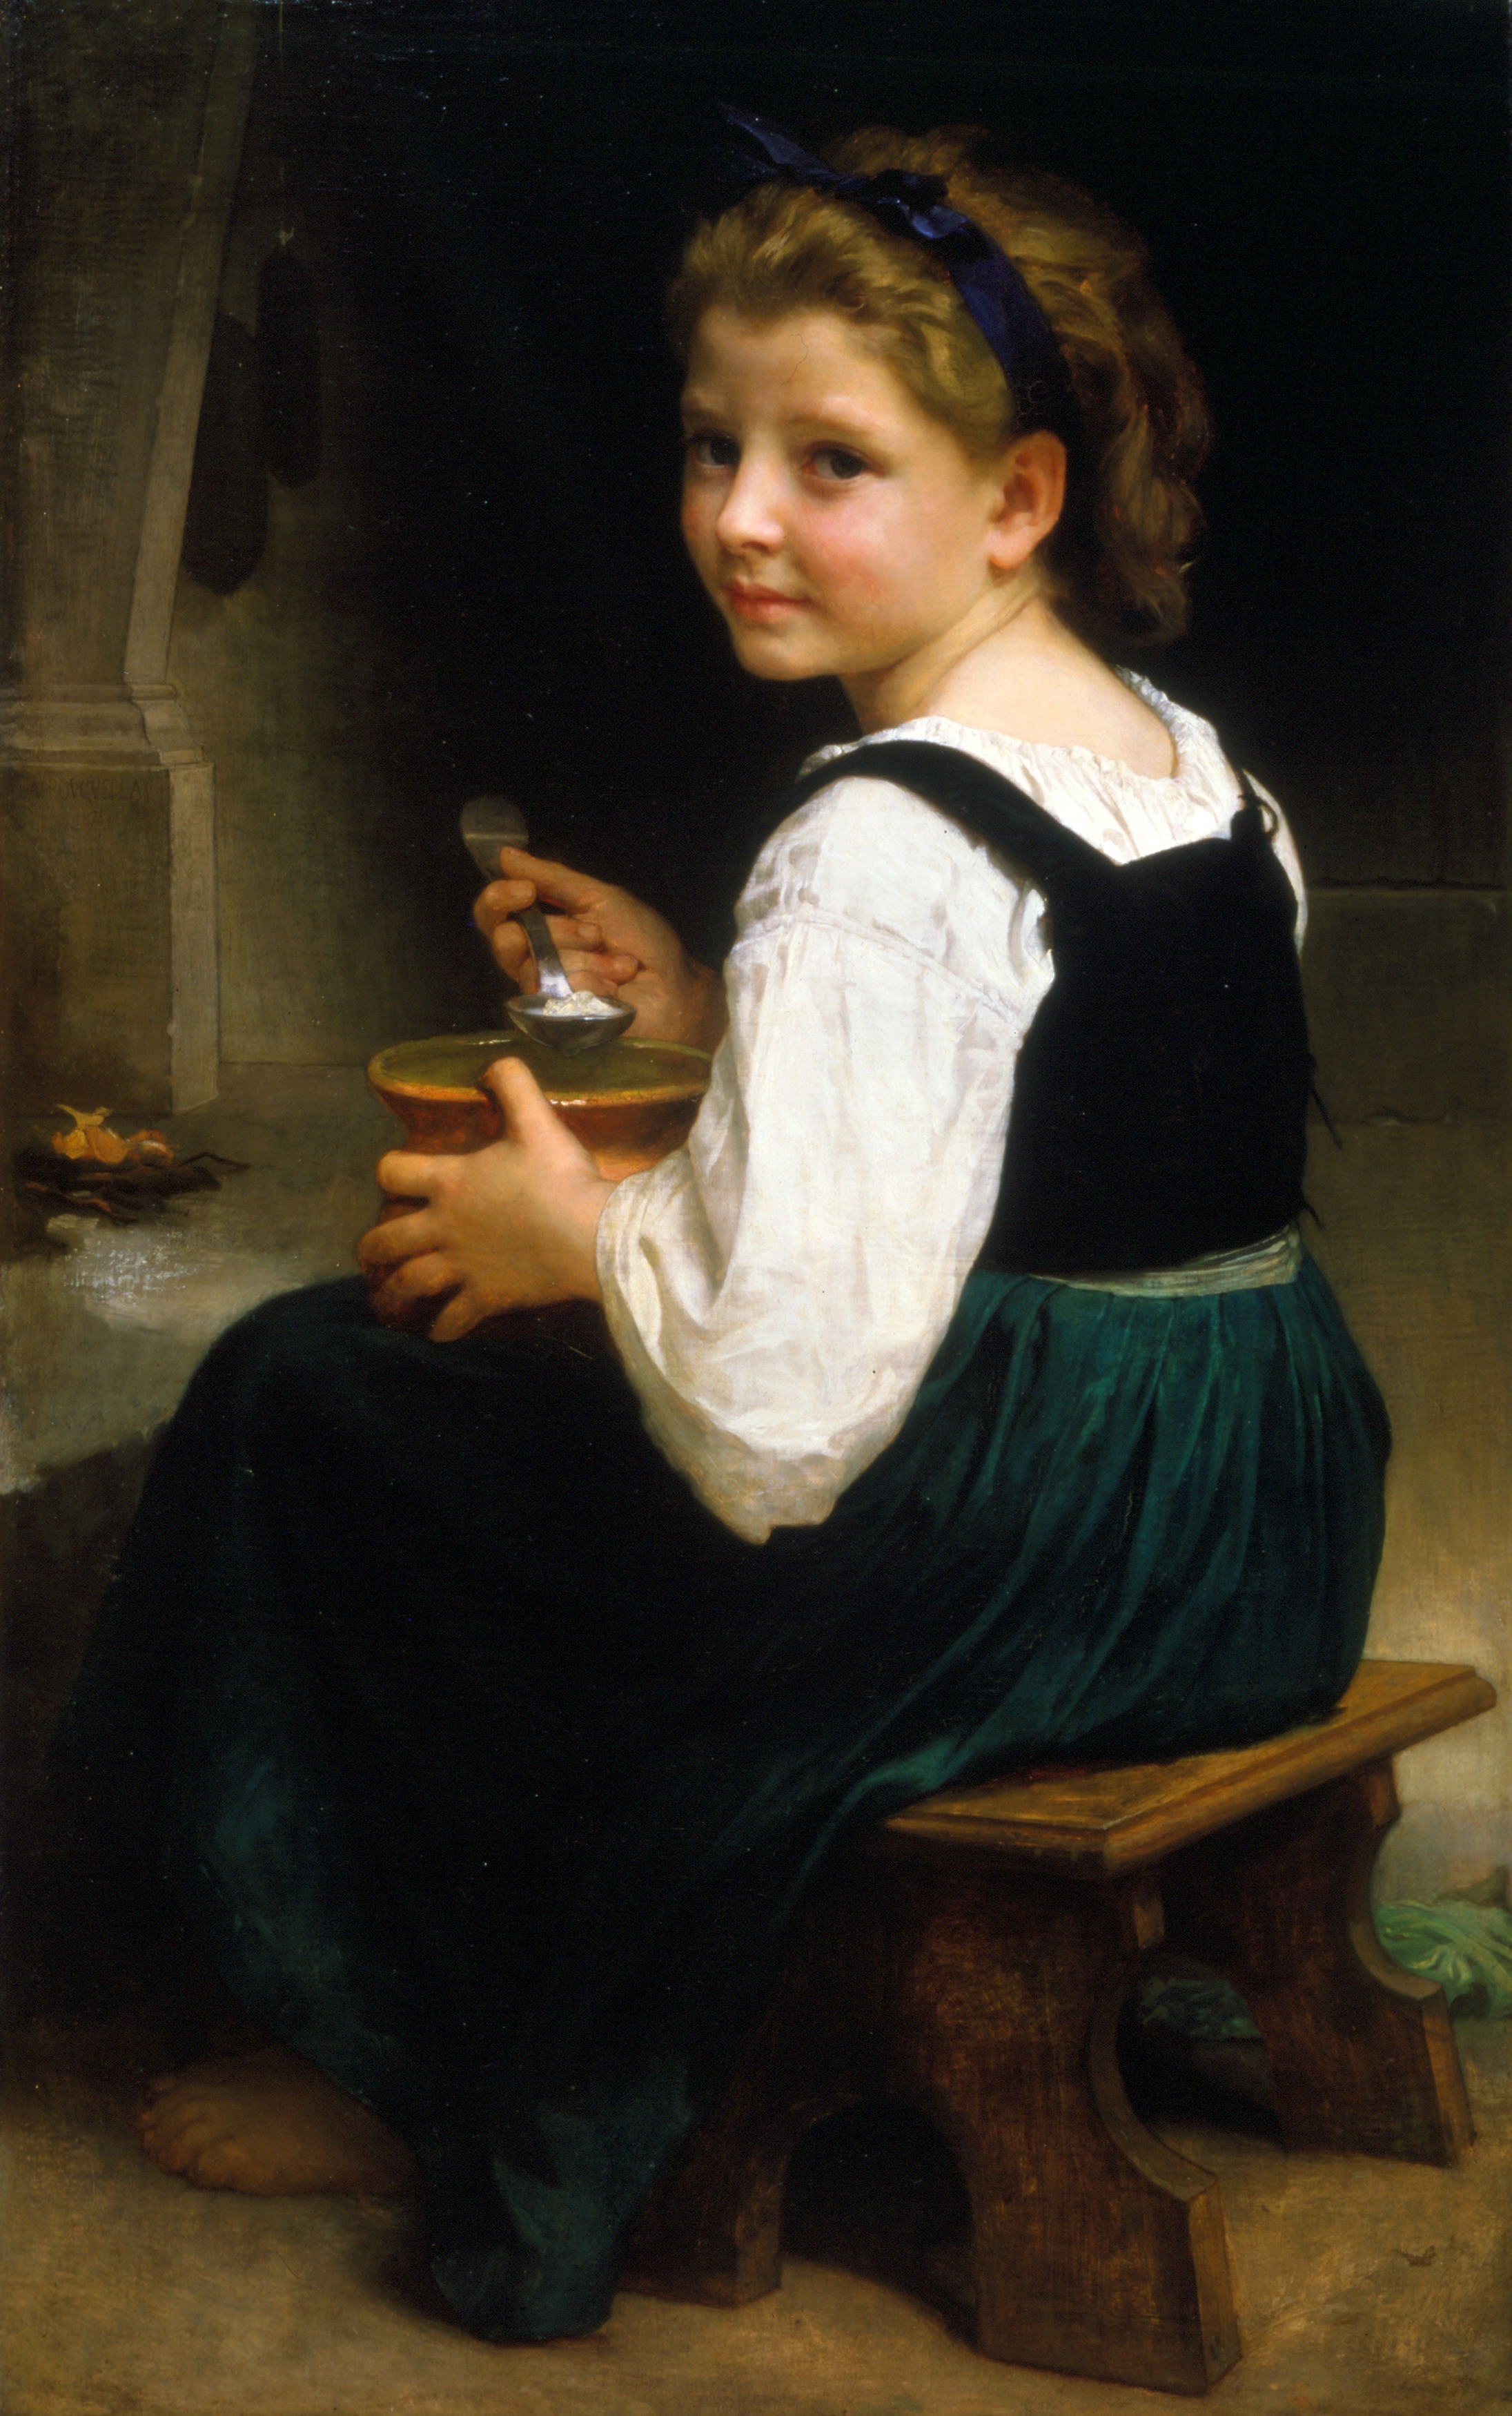 a girl sitting on a stool holding a spoon